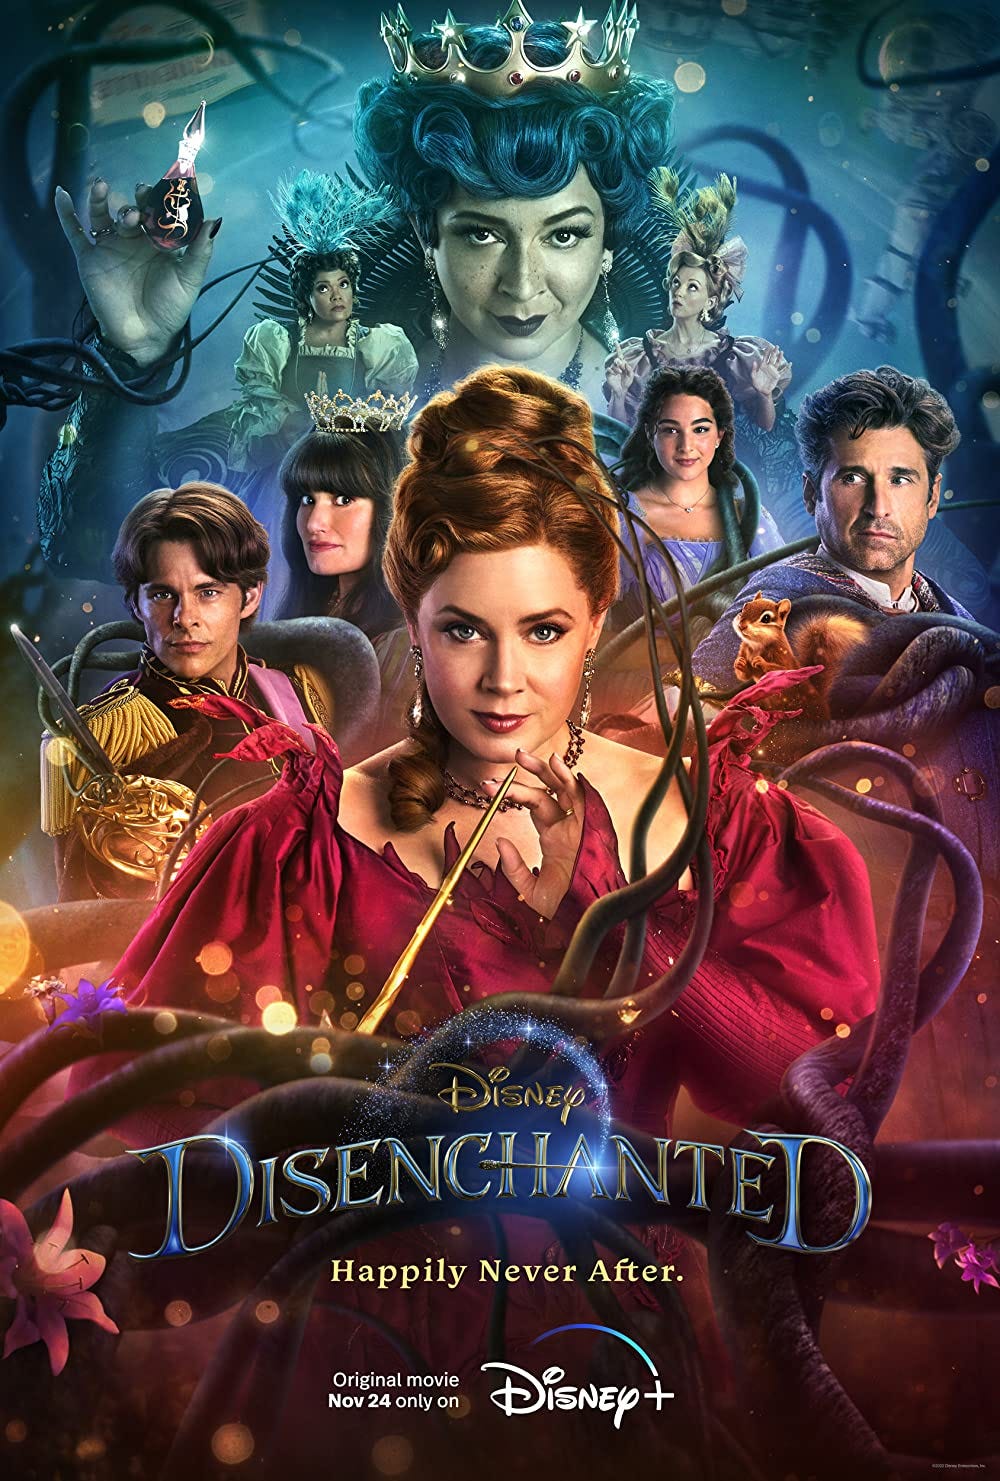 Movie poster art for the 2022 Disney movie, "Disenchanted".